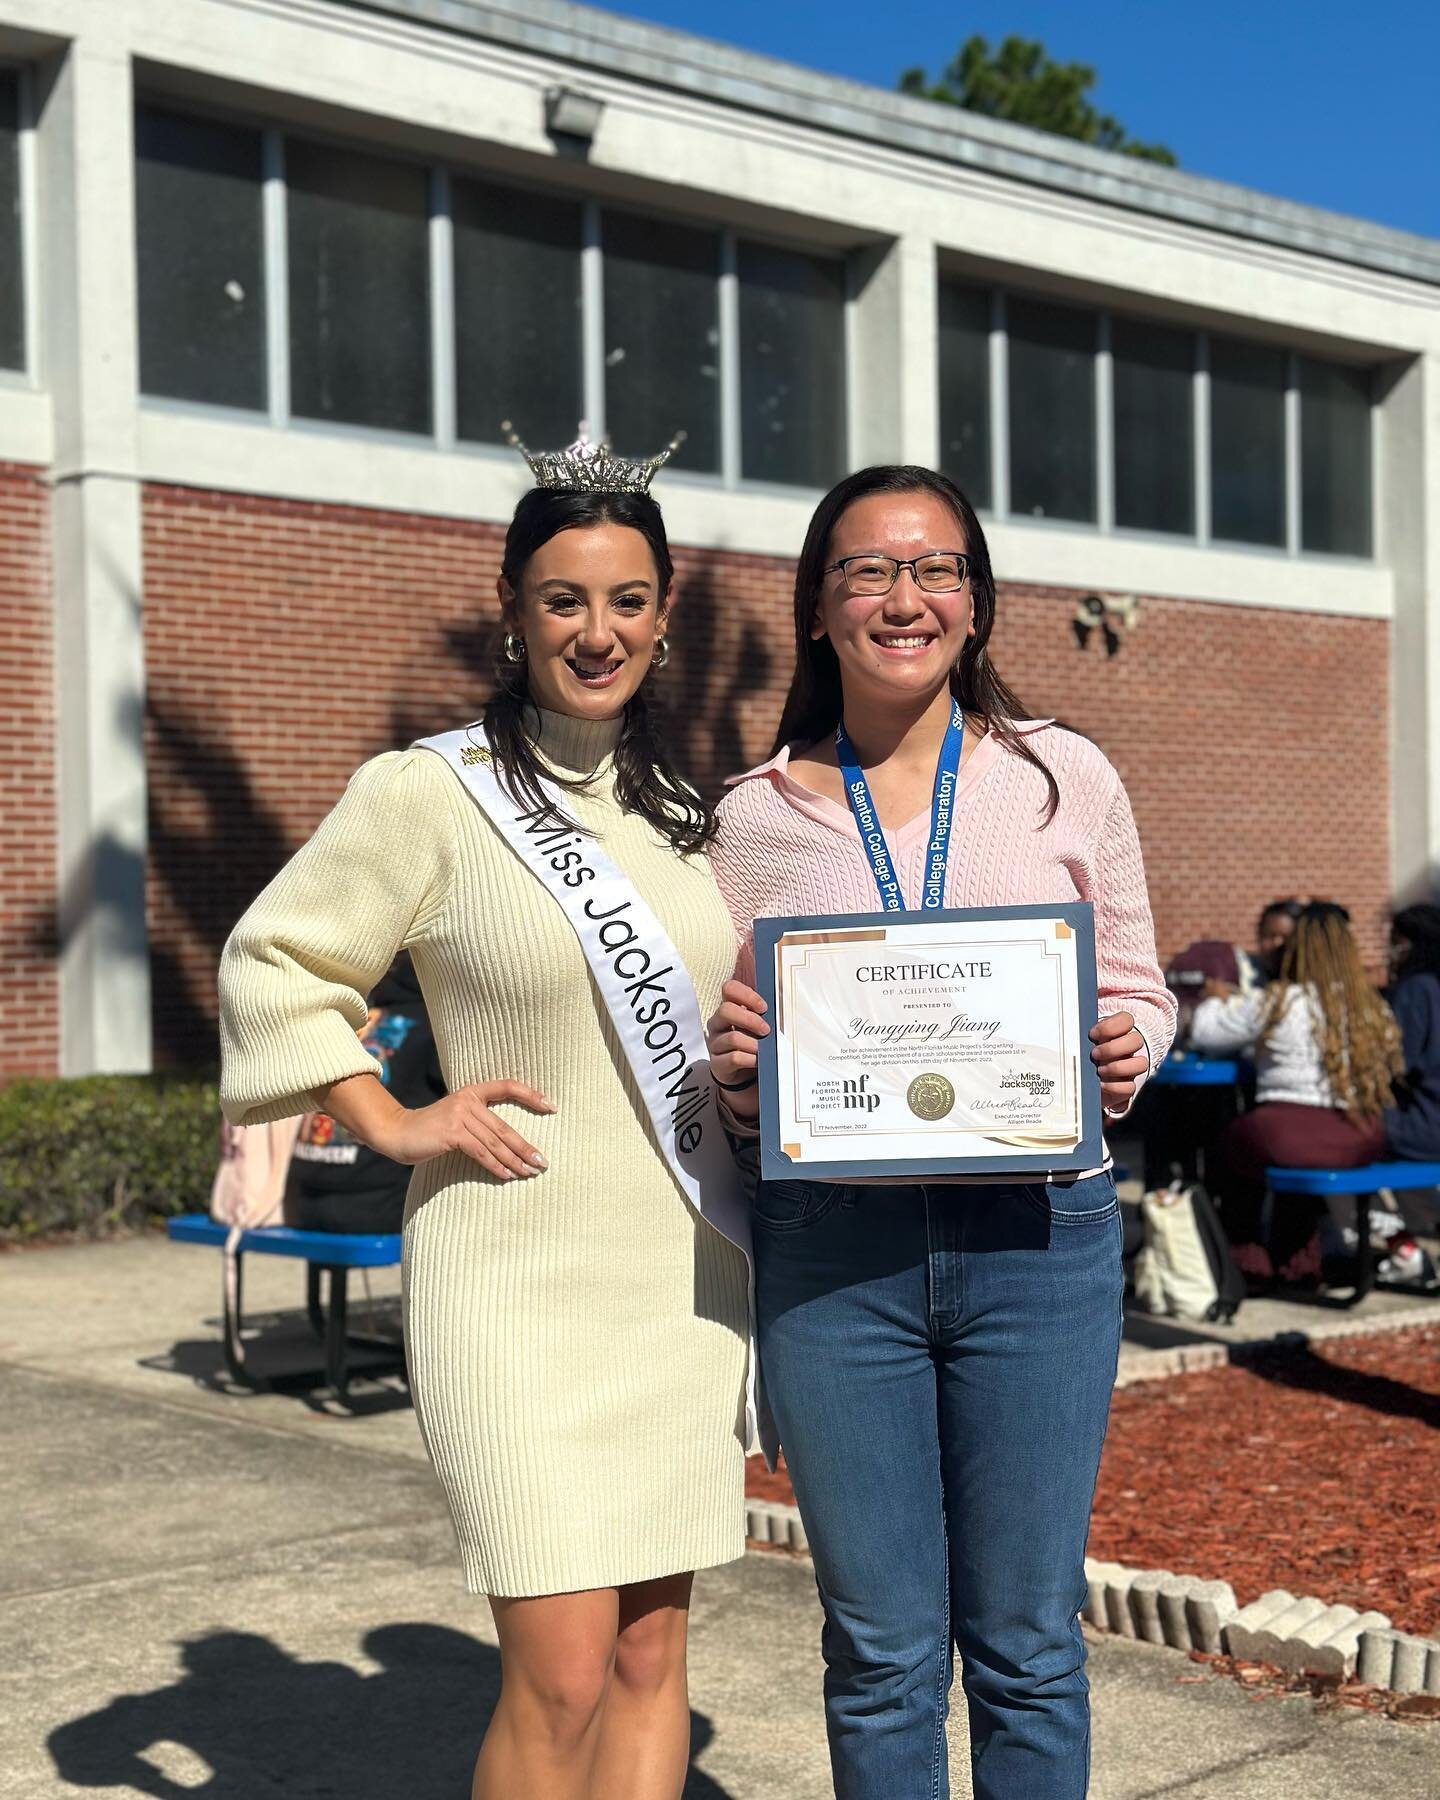 Today, Senior Amanda Jiang received the North Florida Music Project's Songwriting Award from Miss Jacksonville Allison Reade. #devilsadvocate39